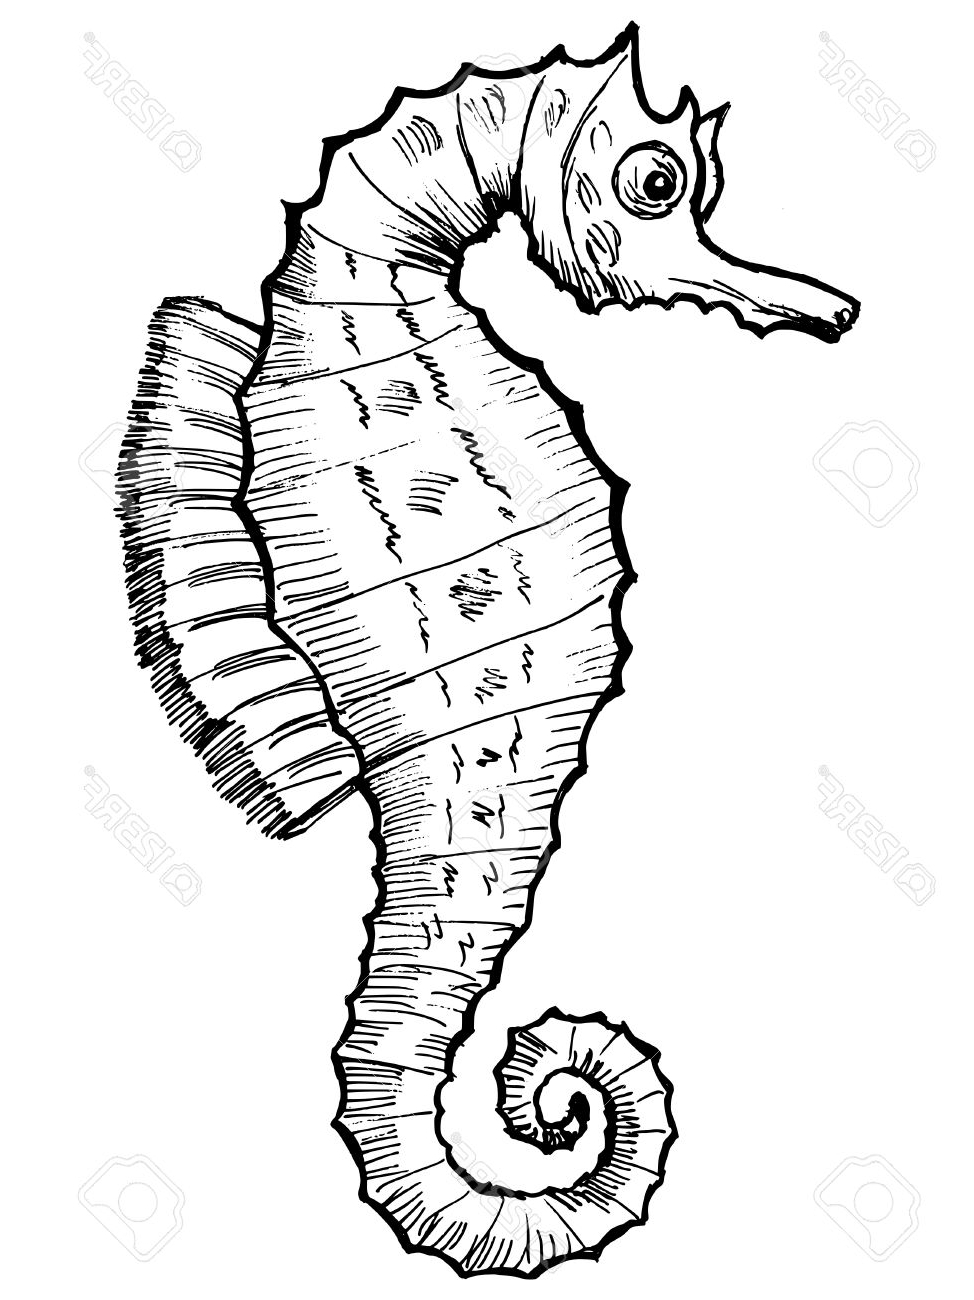 Seahorse Drawing at GetDrawings.com | Free for personal ...